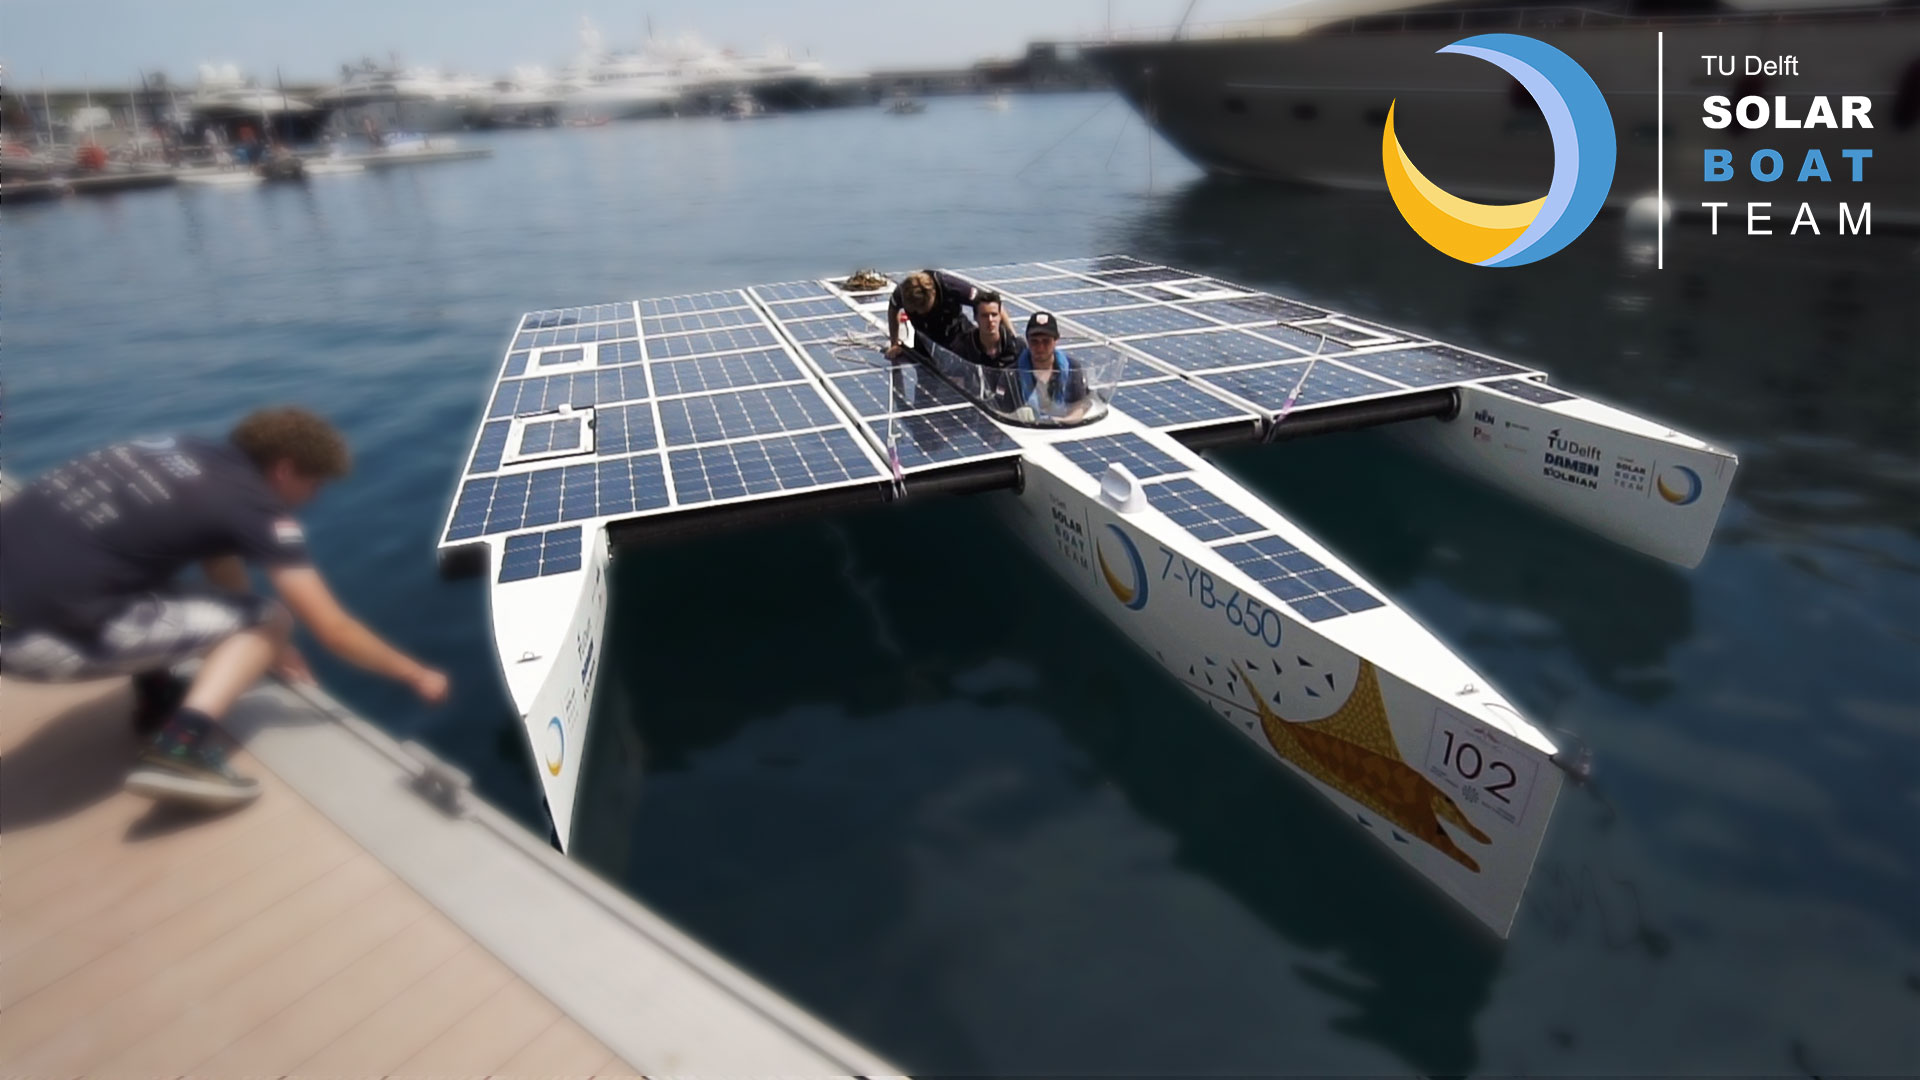 World Champions in offshore solar boat racing